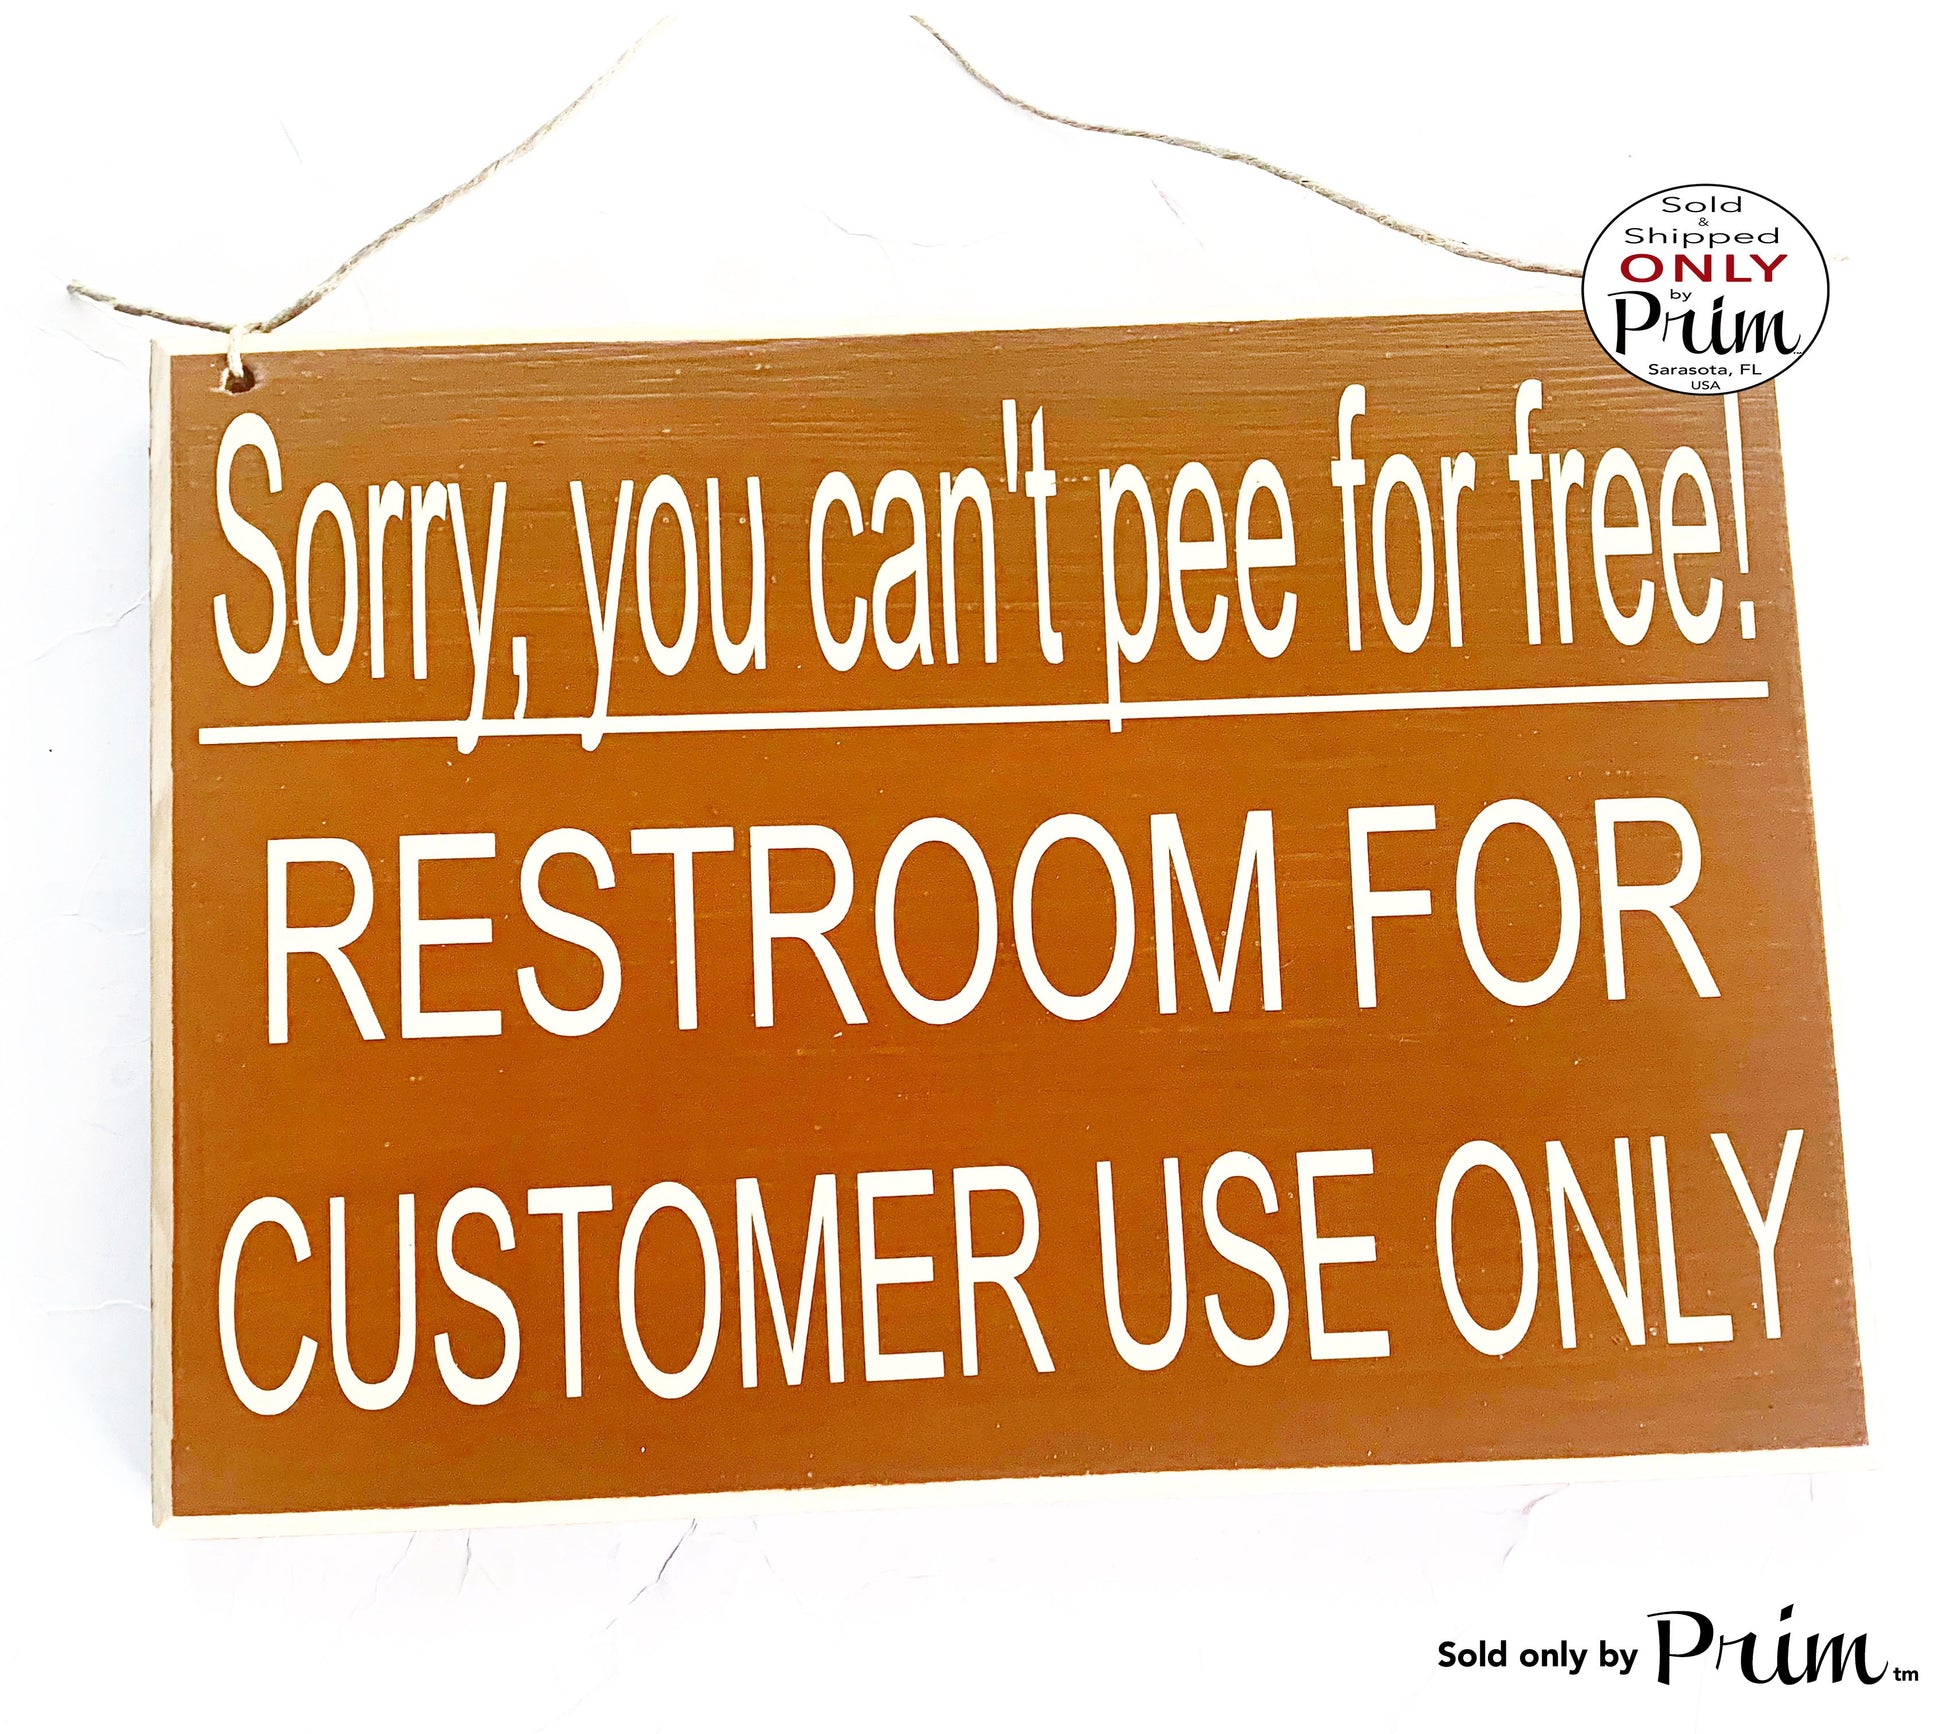 10x8 Sorry You Can't Pee For Free Restroom for Customers Only Custom Wood Sign | No Public Bath Private Business Office No Entry Door Plaque Designs by Prim